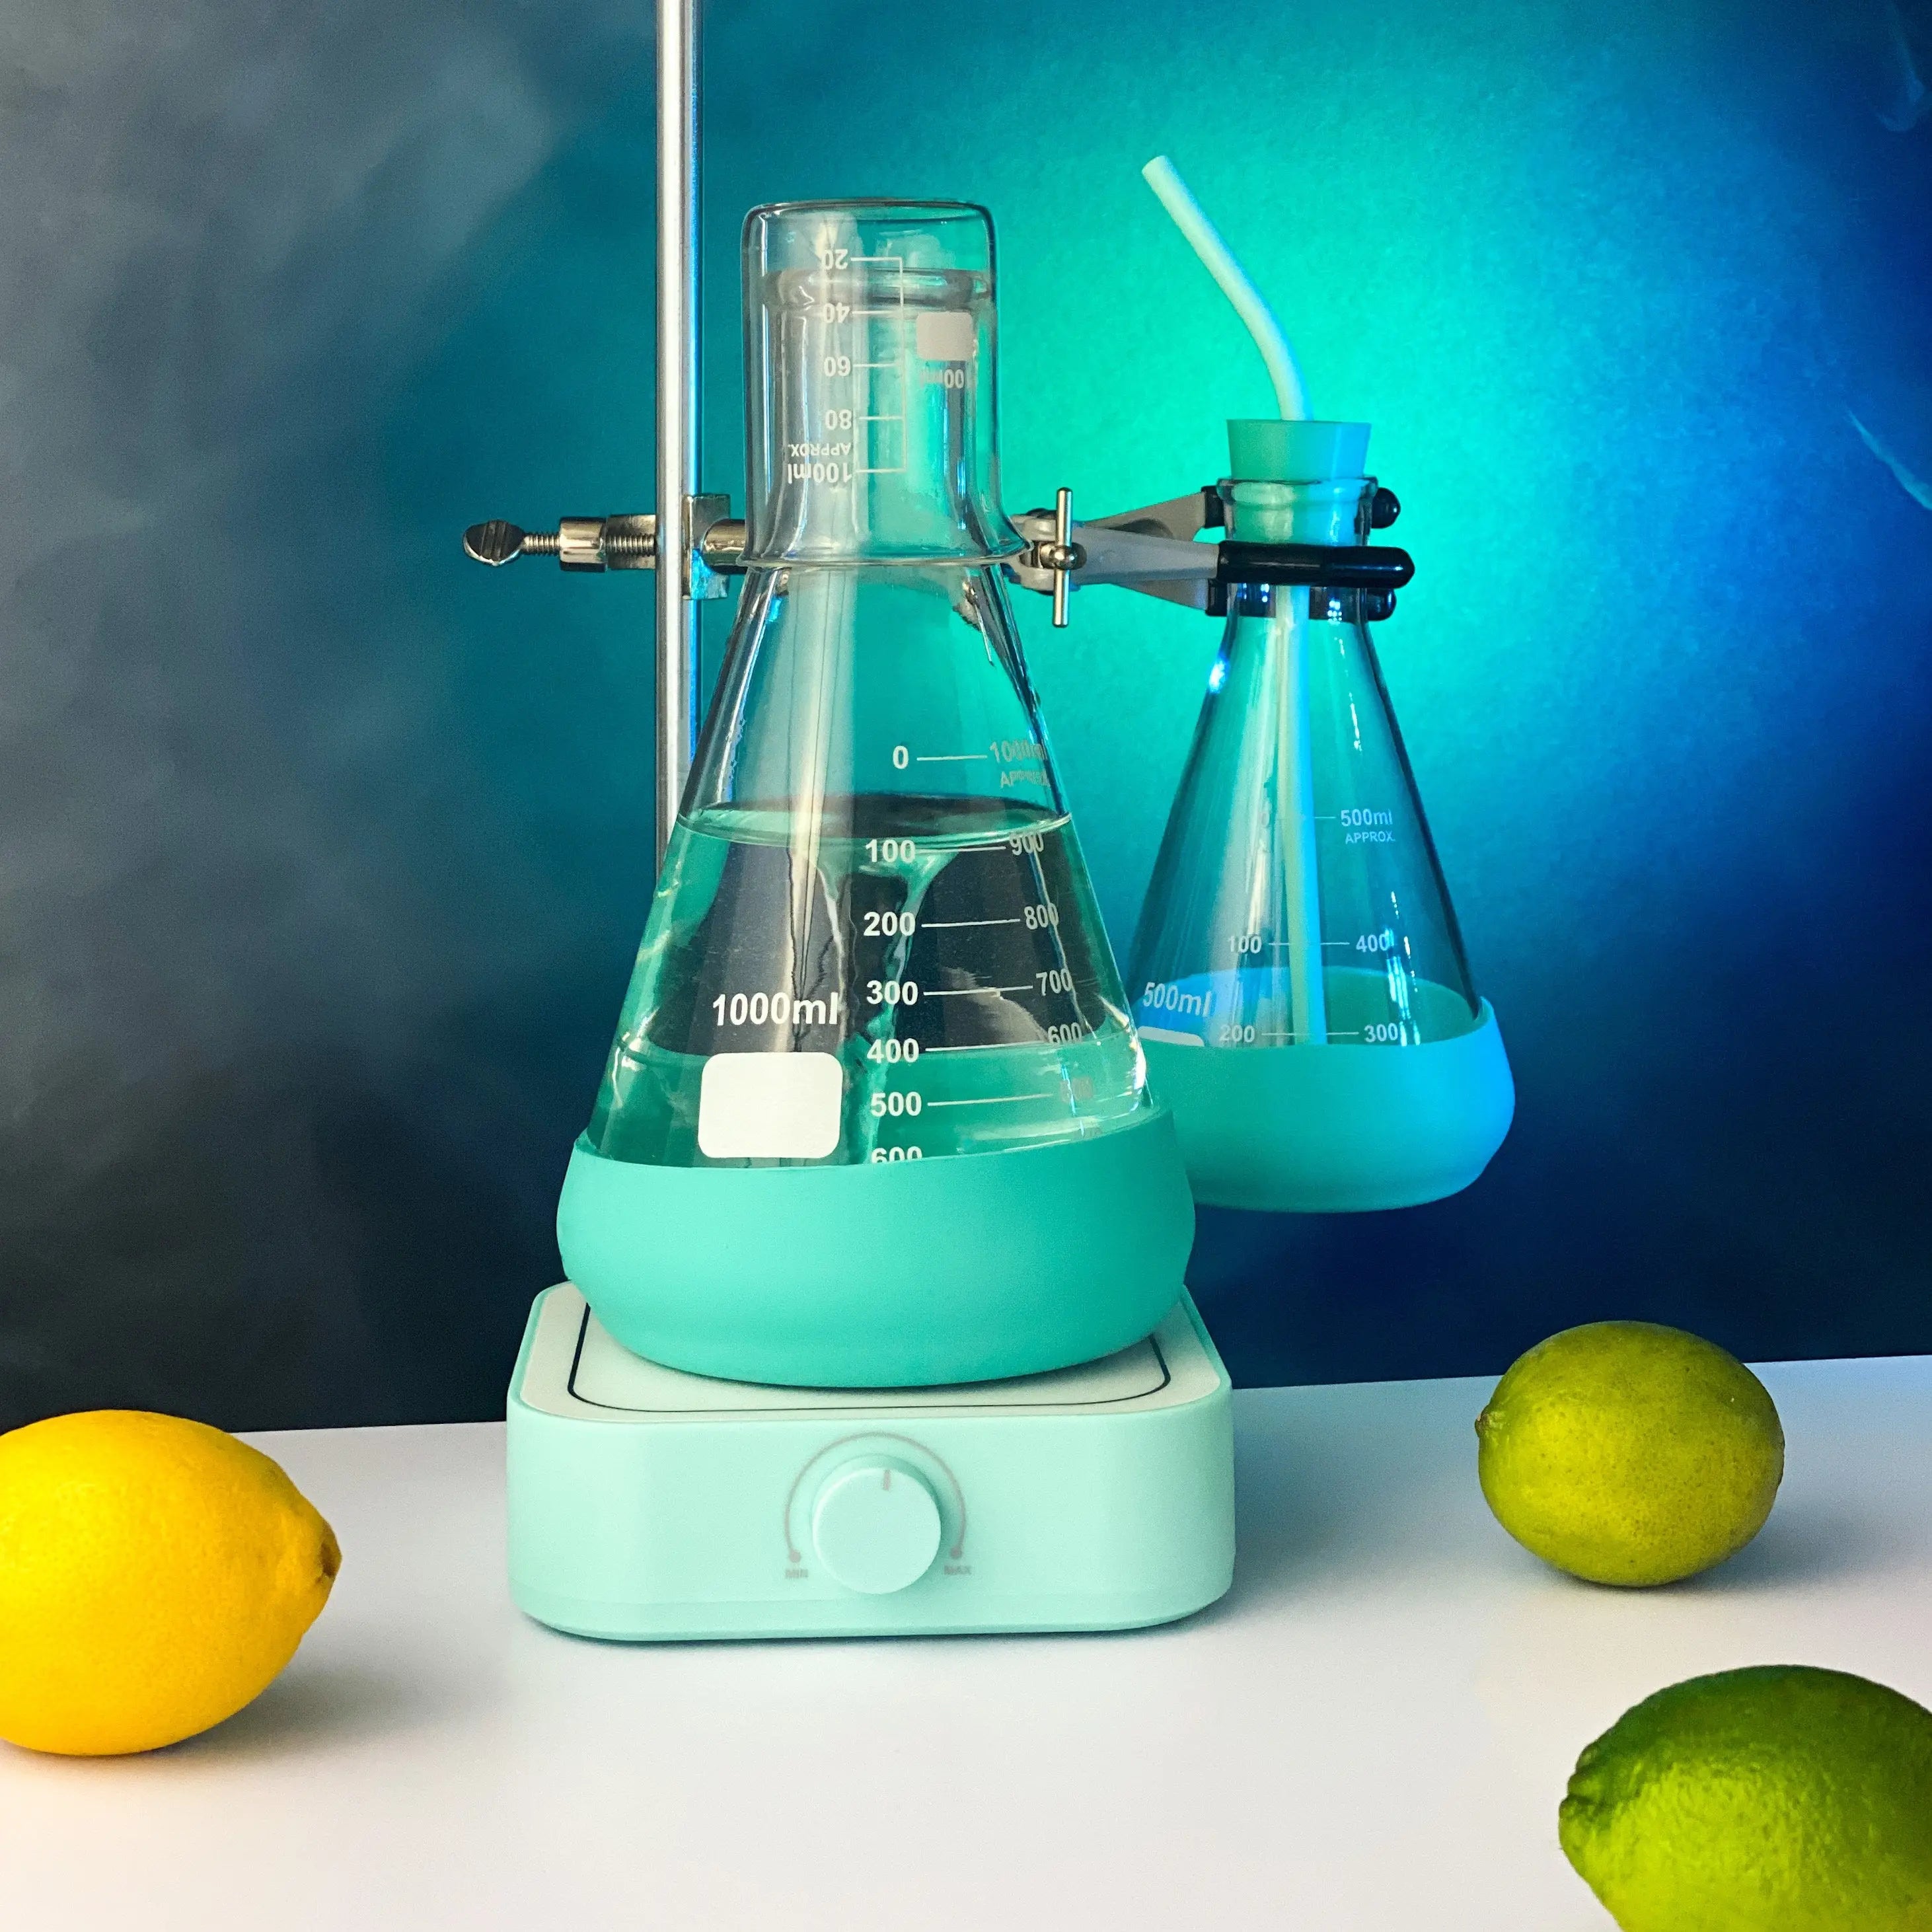 A perfect gift for science land chemistry lovers, this glass bedside carafe is made from a laboratory-grade Erlenmeyer flask and beaker drinking cup and accented with food-grade silicone.